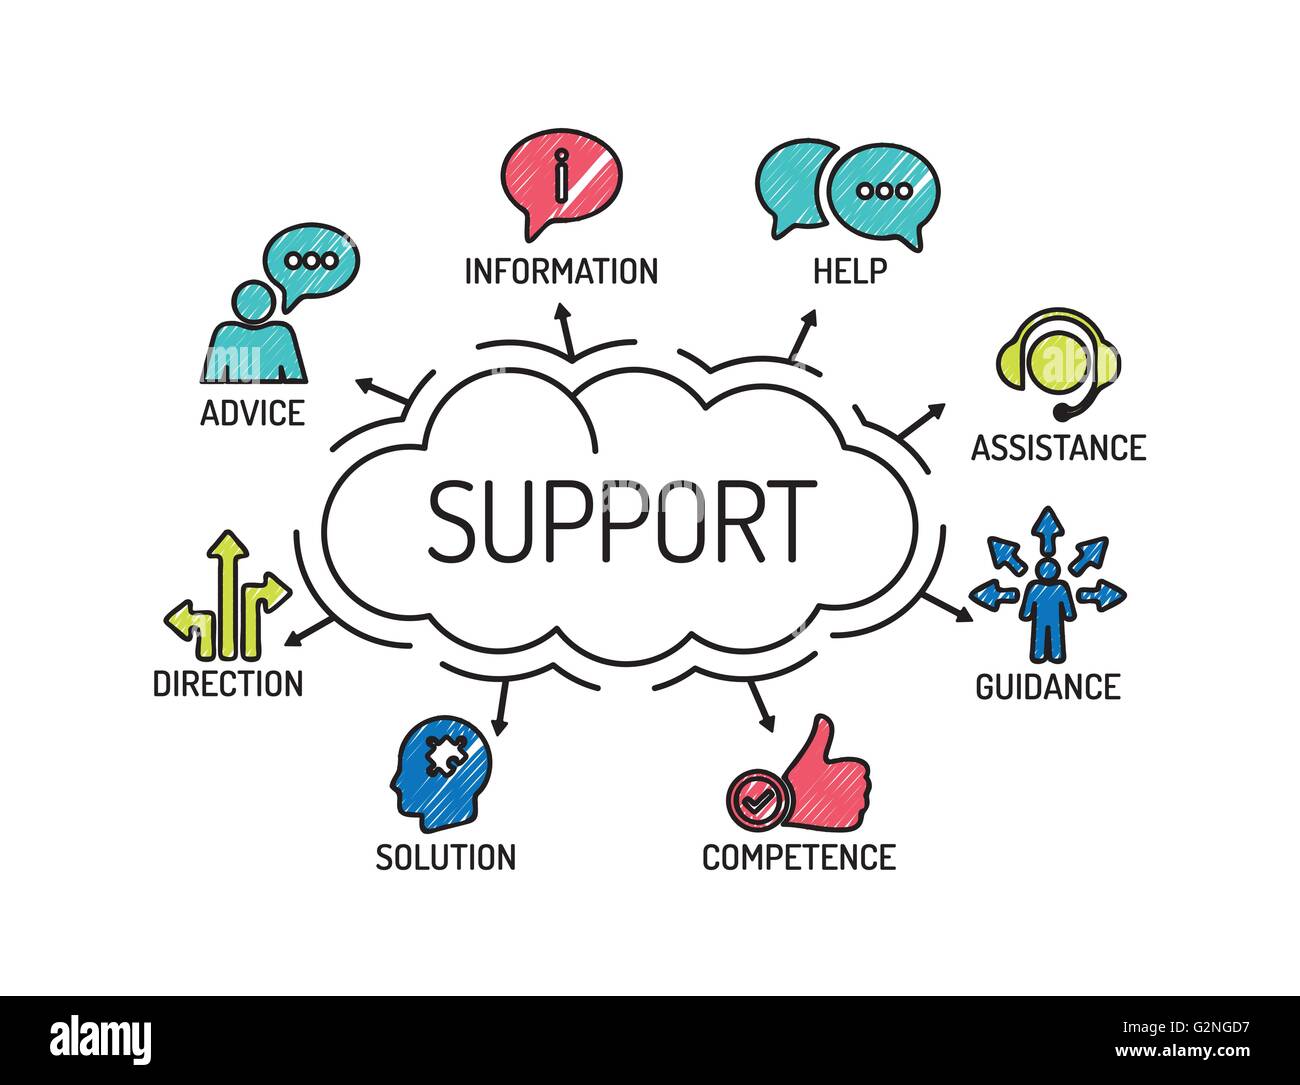 Support. Chart with keywords and icons. Sketch Stock Vector